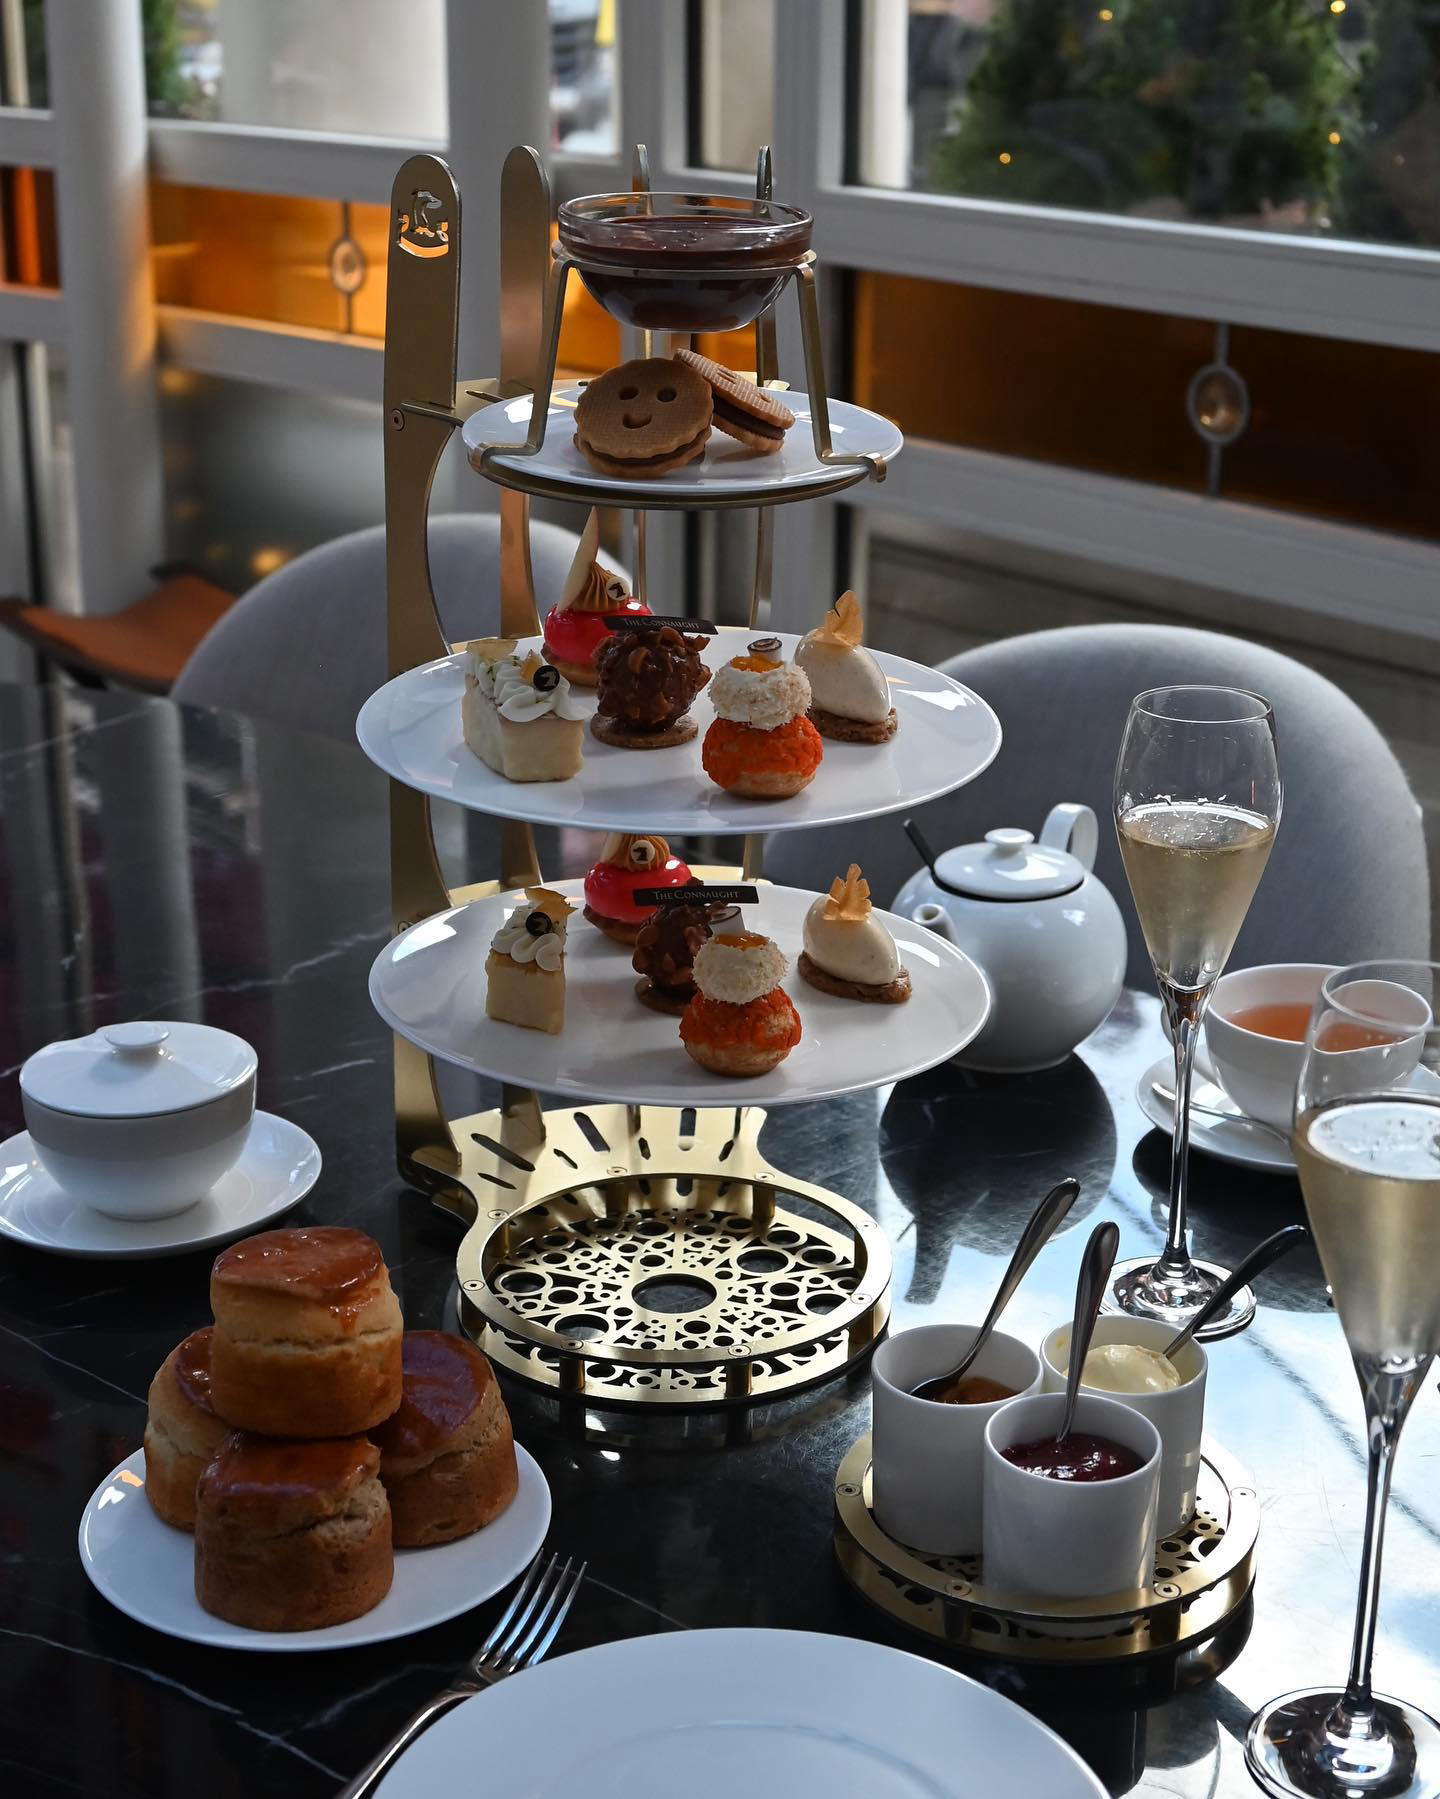 It’s afternoon tea o’clock and our very own Pastry Chef #nicolasrouzaud has unveiled his latest coll